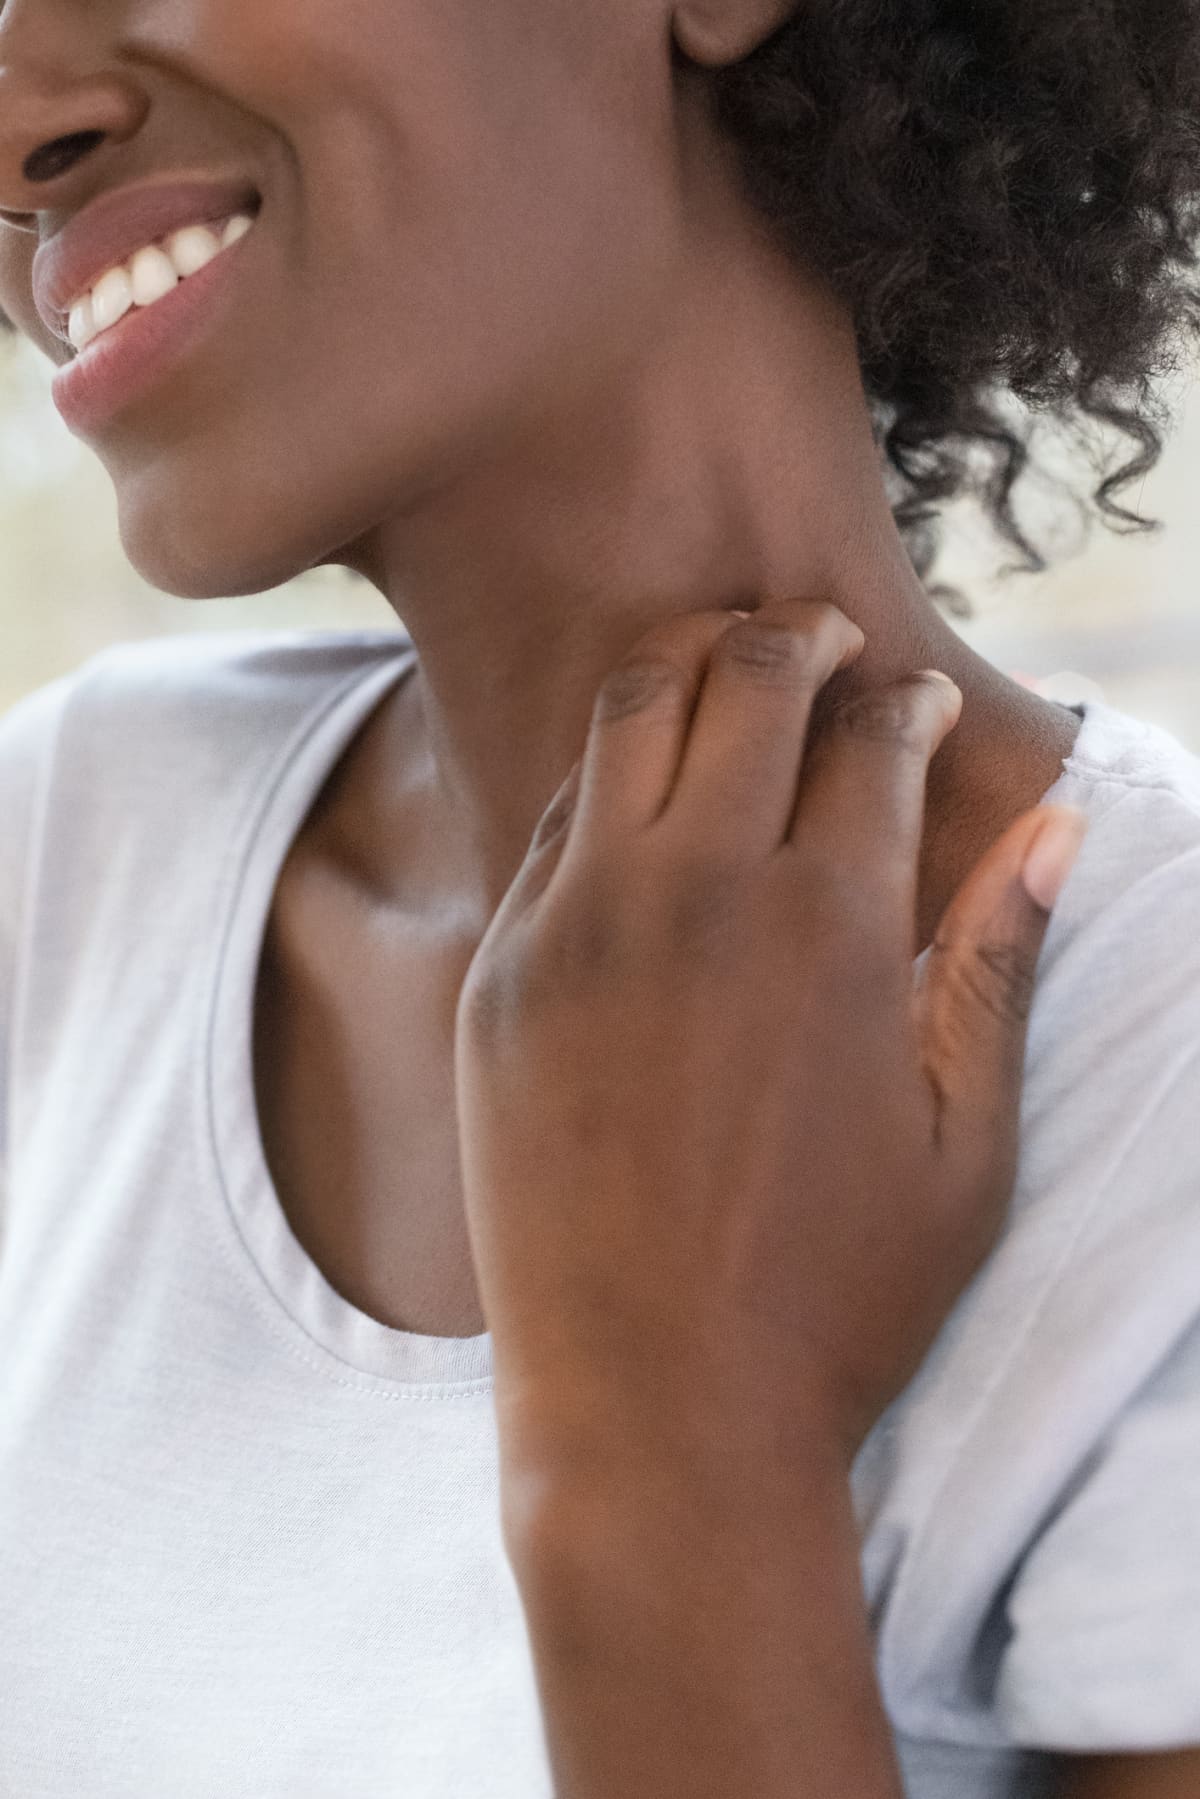 Woman scratching her neck.